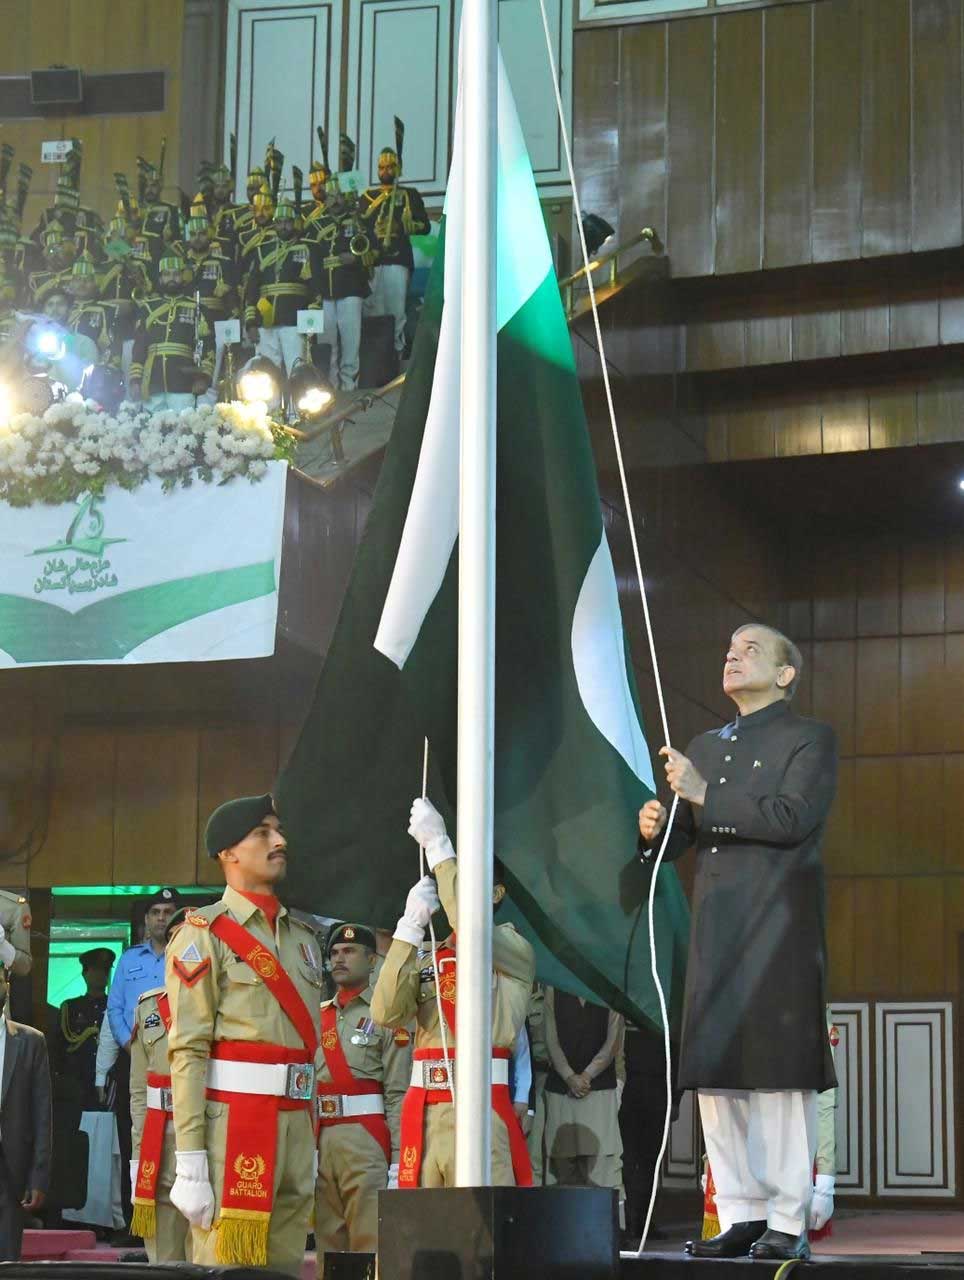 Pakistan releases re-recorded national anthem on diamond jubilee of independence